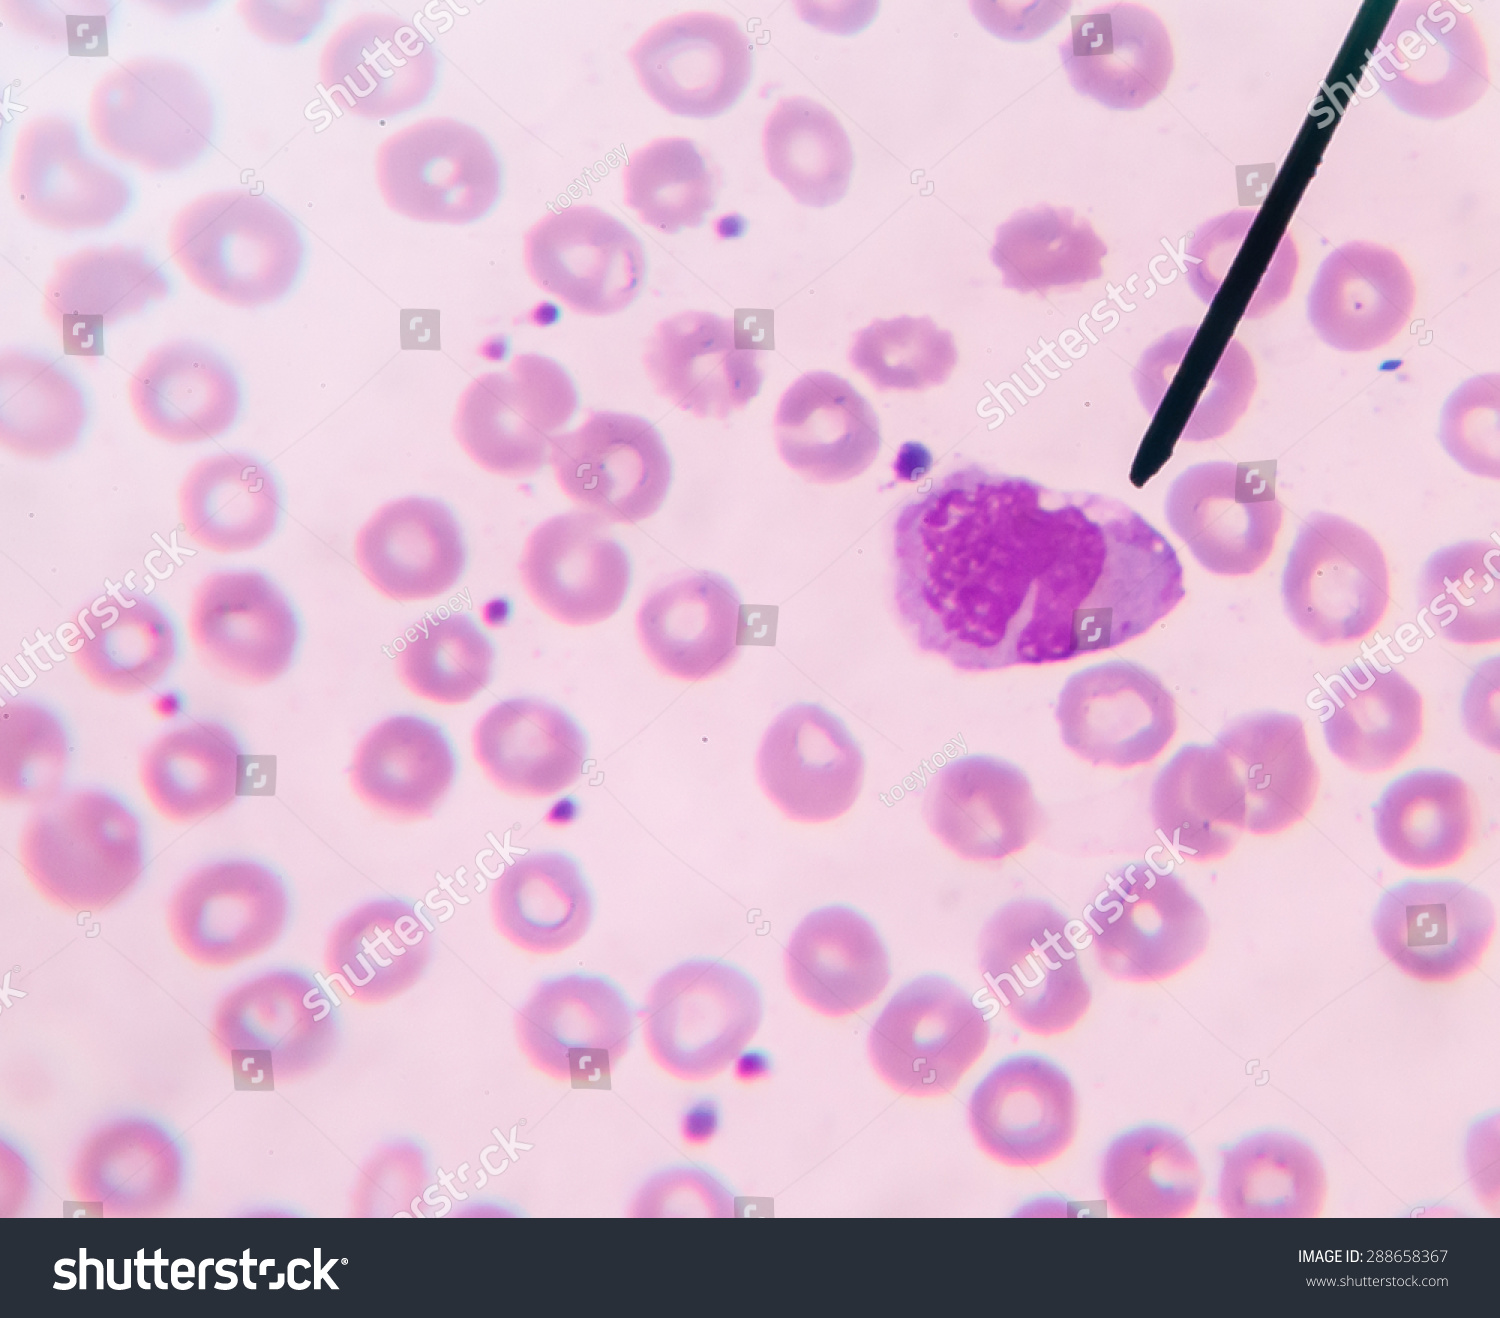 Monocyte Show In Blood Smear Cbc Test Find With Microscope. Stock Photo ...